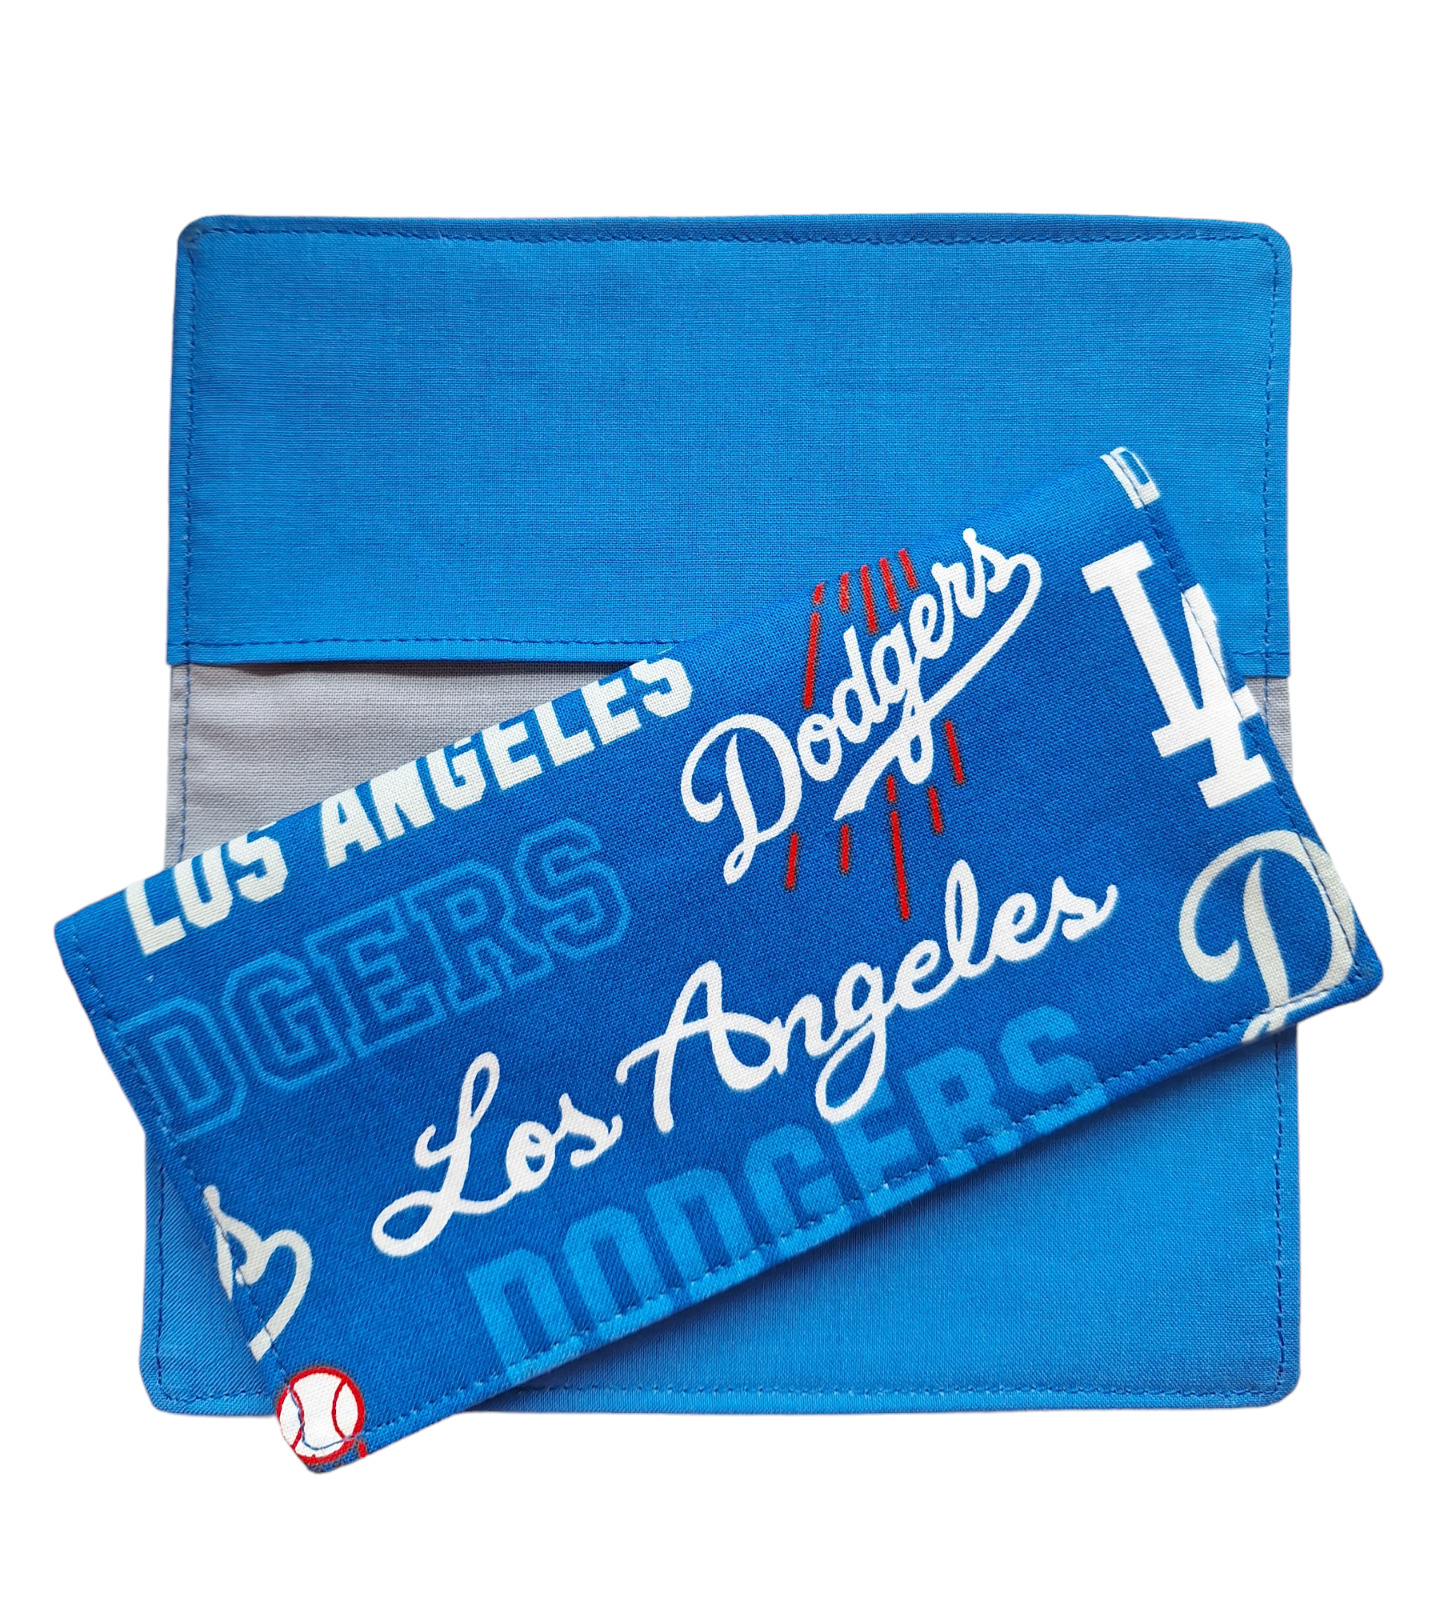 Cotton Fabric MLB Los Angeles Dodgers Checkbook Cover